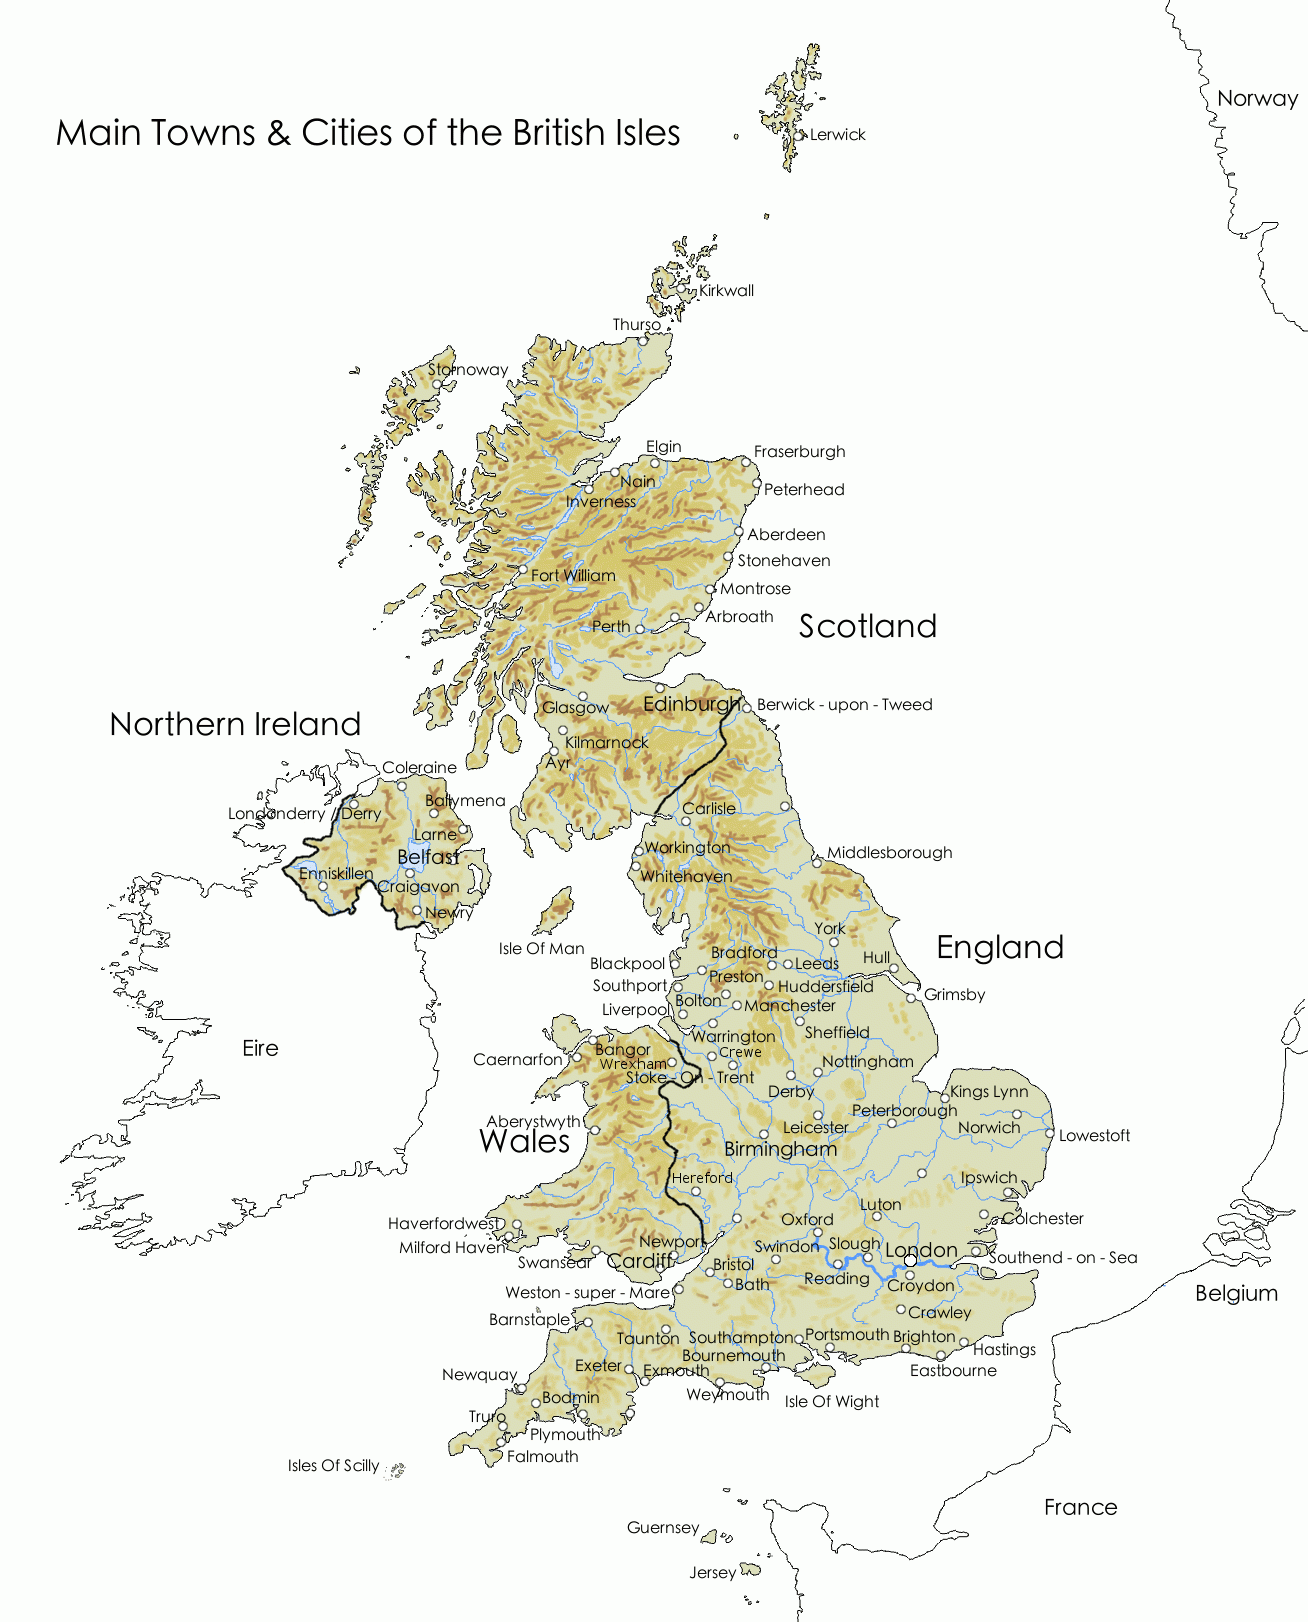 Map Of Major Towns Cities In The British Isles Britain 